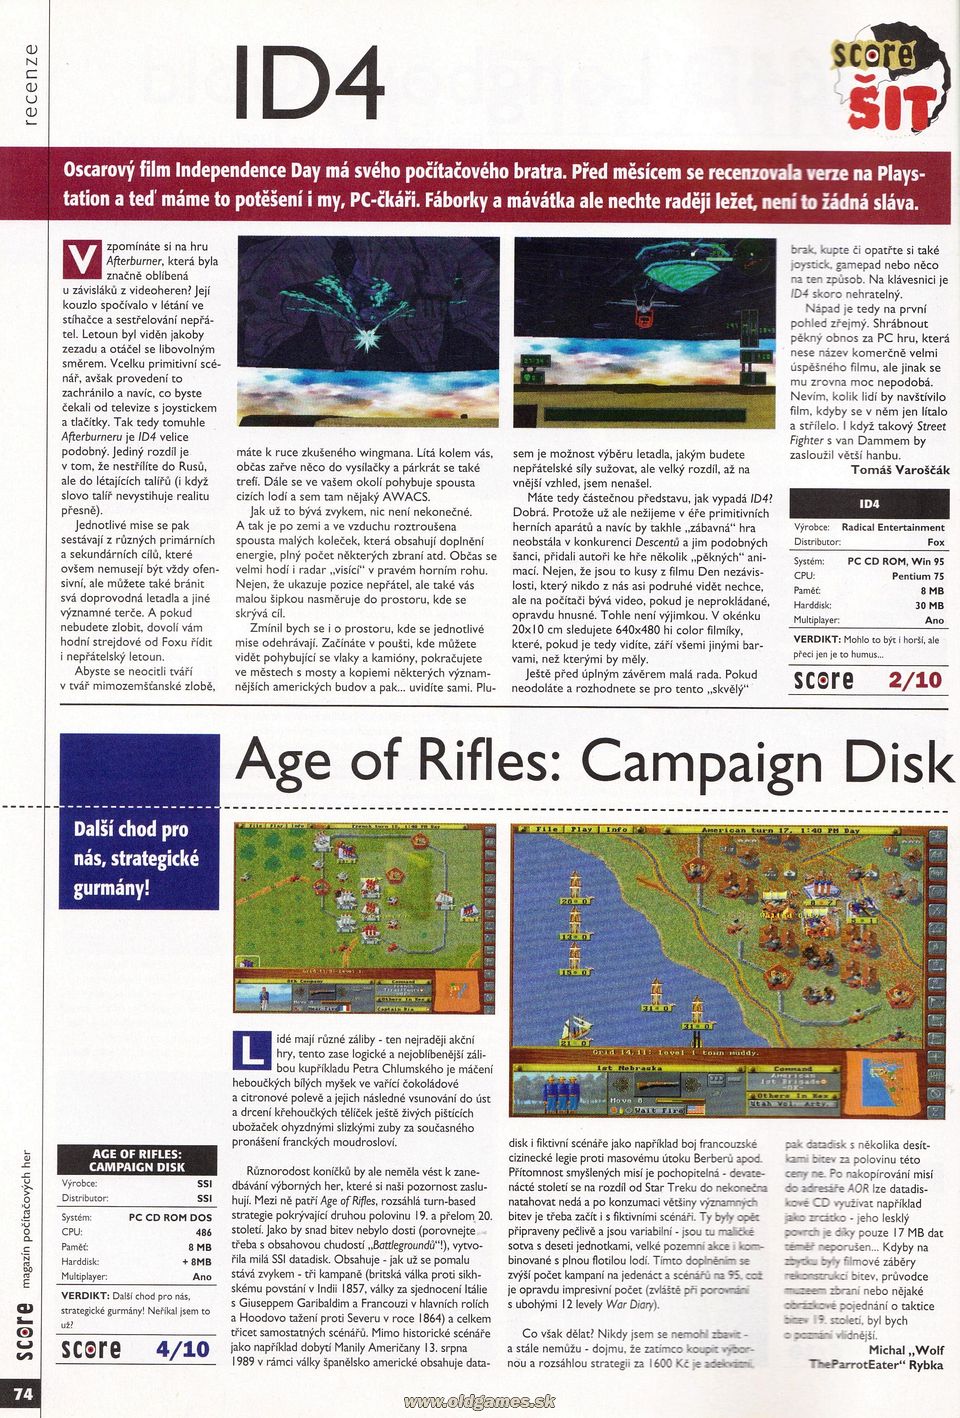 ID4, Age of Rifles: Campaign Disk